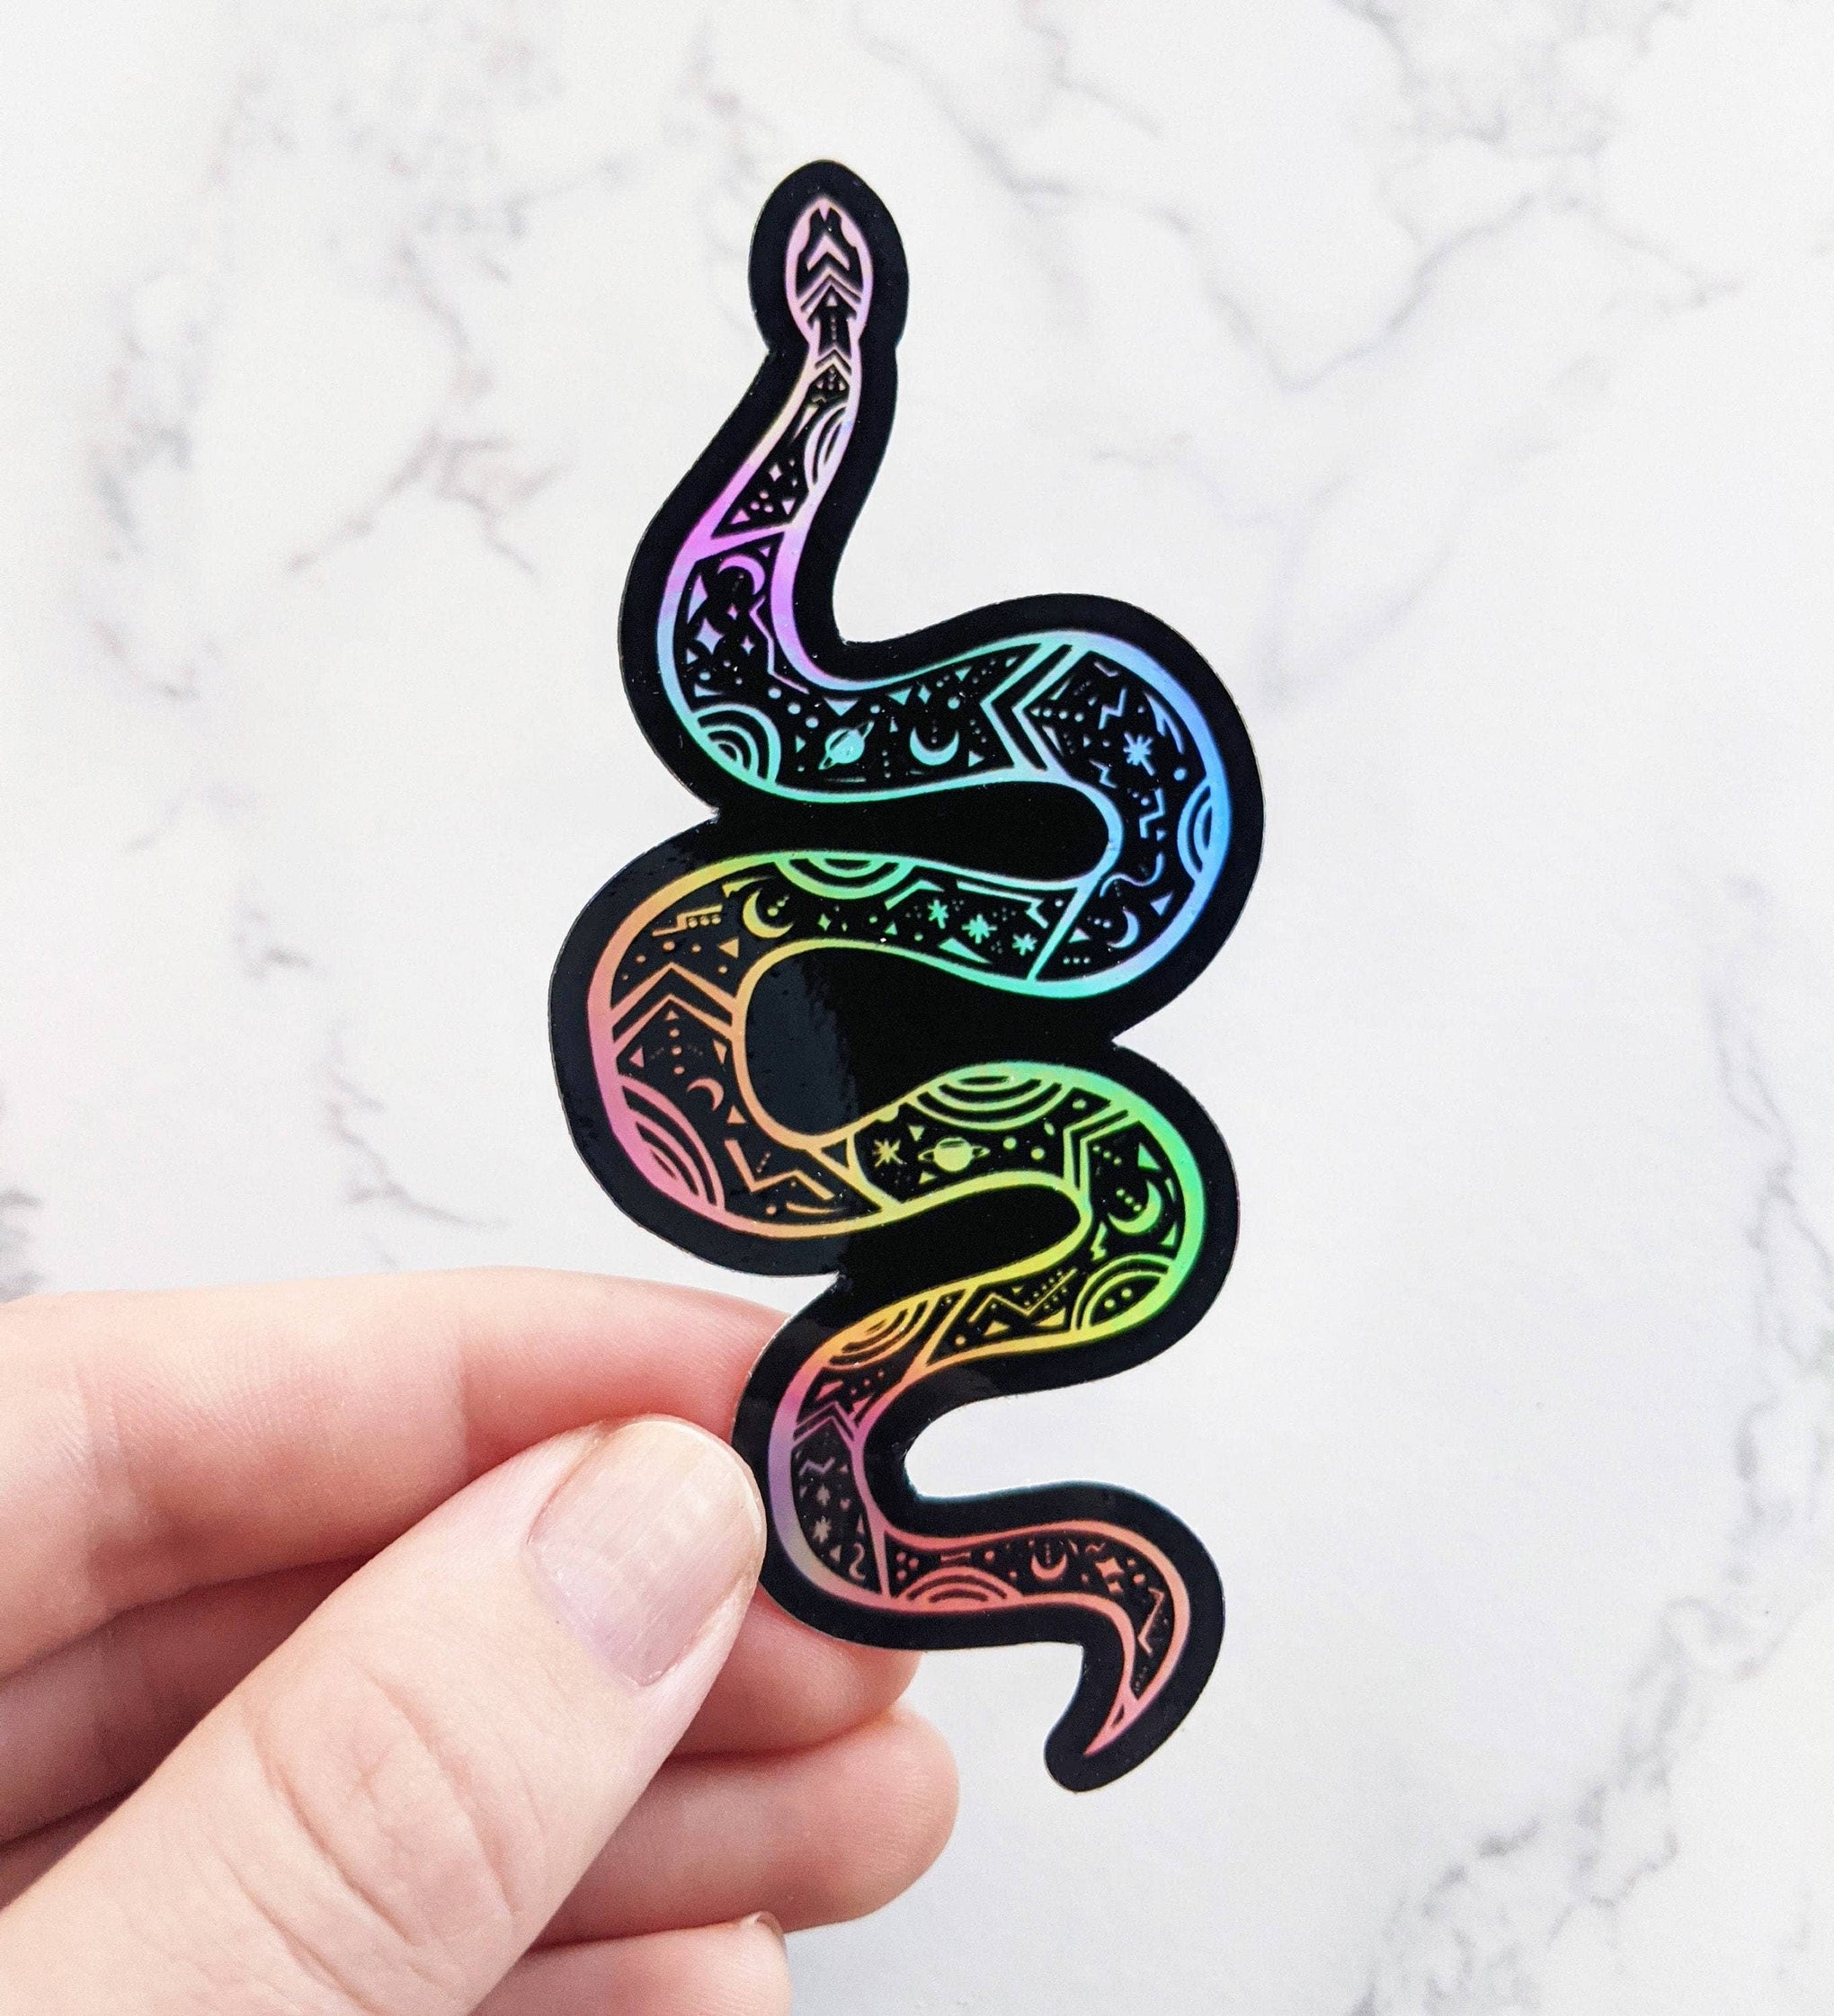 You Got This - Black Rainbow Holographic Sticker